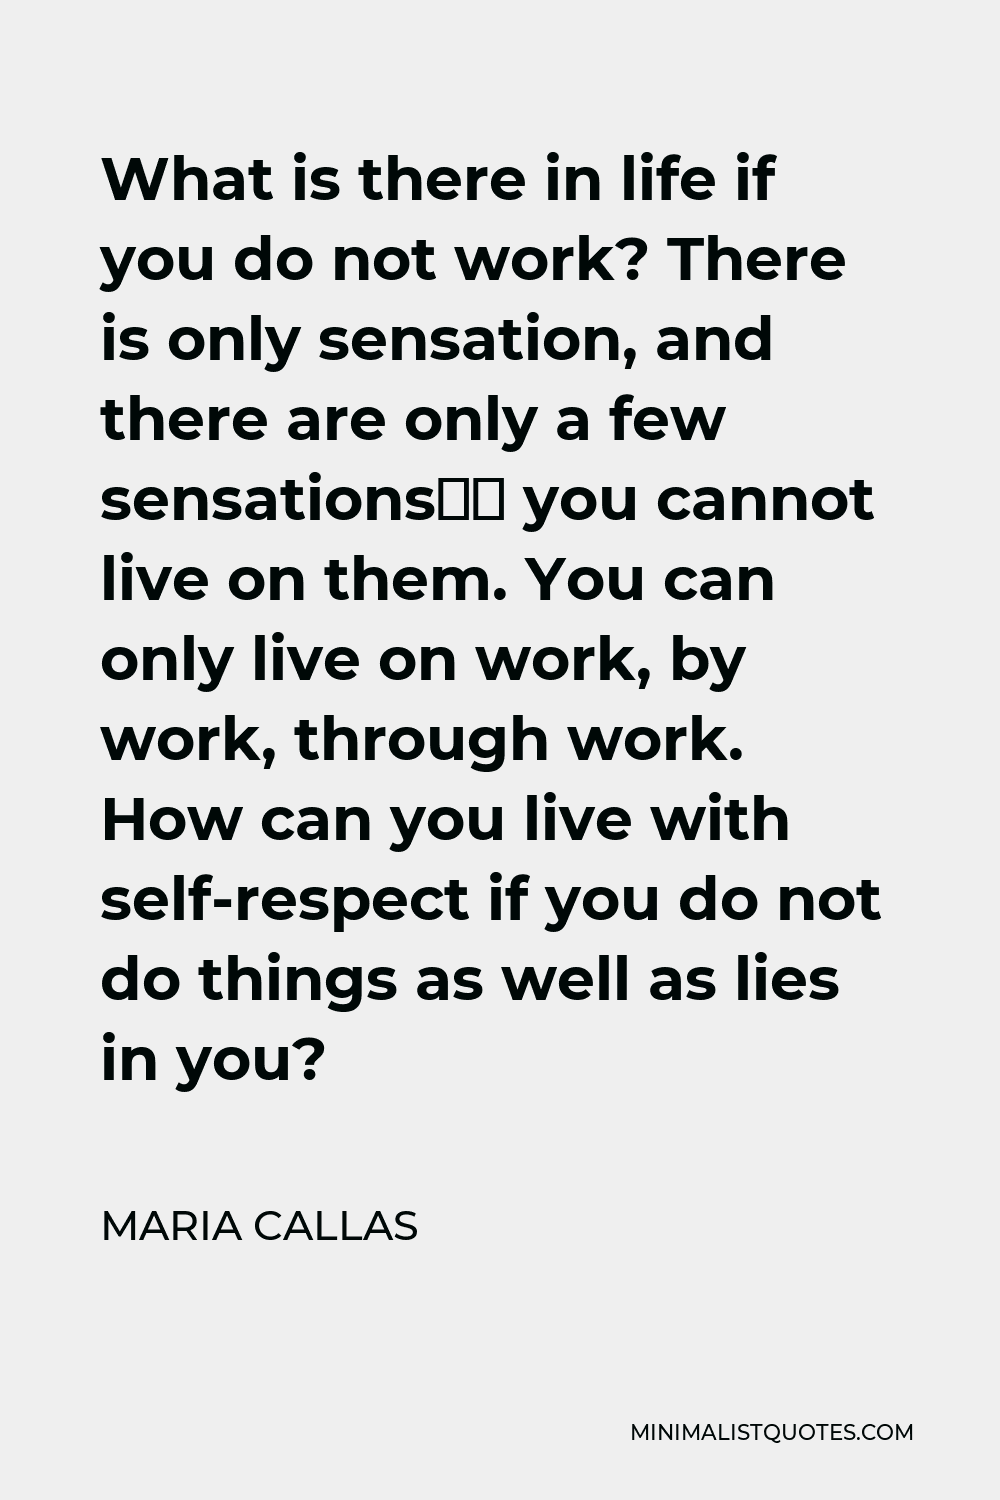 Maria Callas Quote - What is there in life if you do not work? There is only sensation, and there are only a few sensations— you cannot live on them. You can only live on work, by work, through work. How can you live with self-respect if you do not do things as well as lies in you?